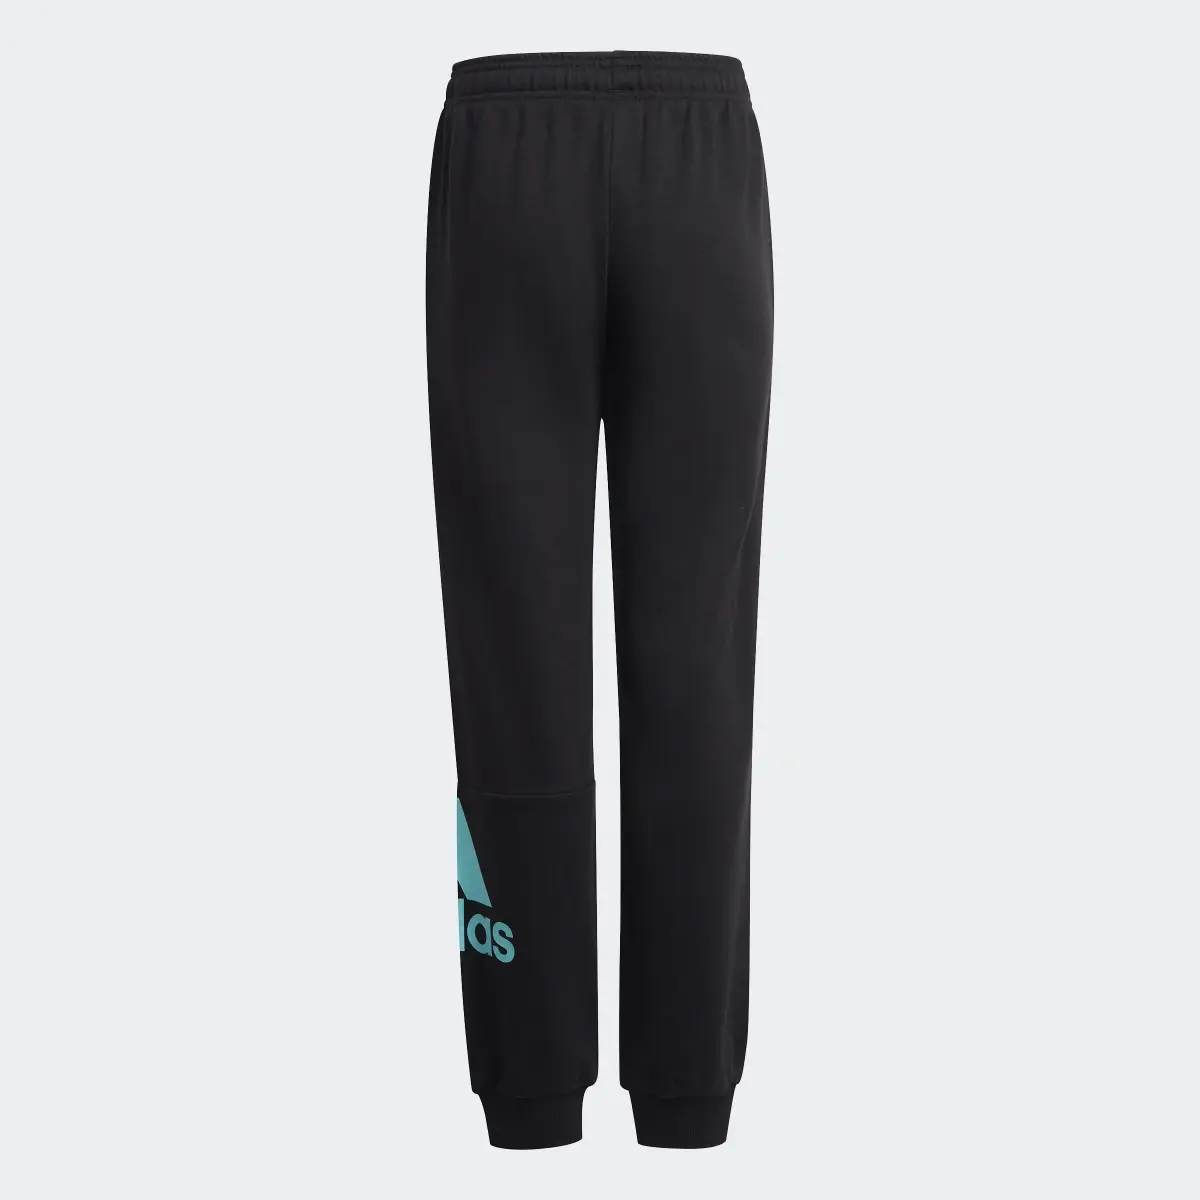 Adidas Essentials French Terry Pants. 2